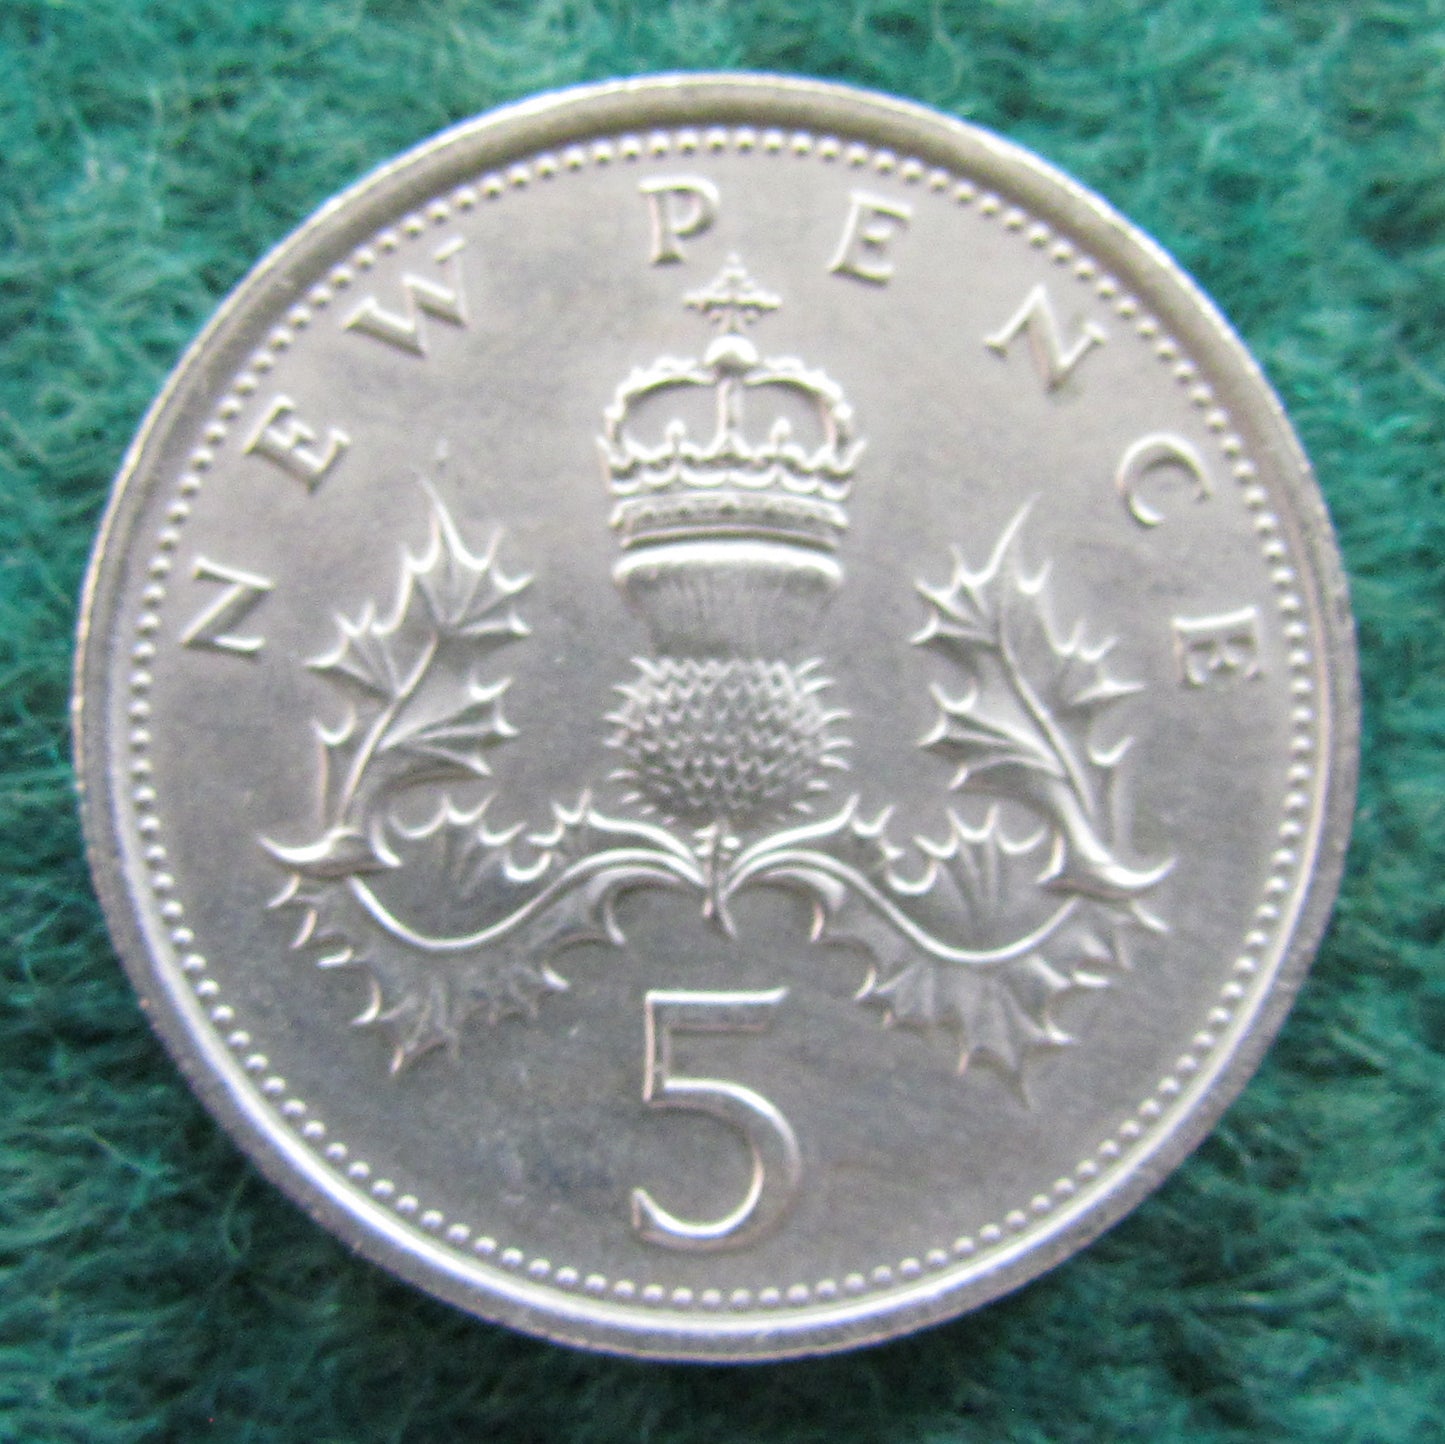 GB British UK English 1975 5 New Pence Queen Elizabeth II Coin - Circulated